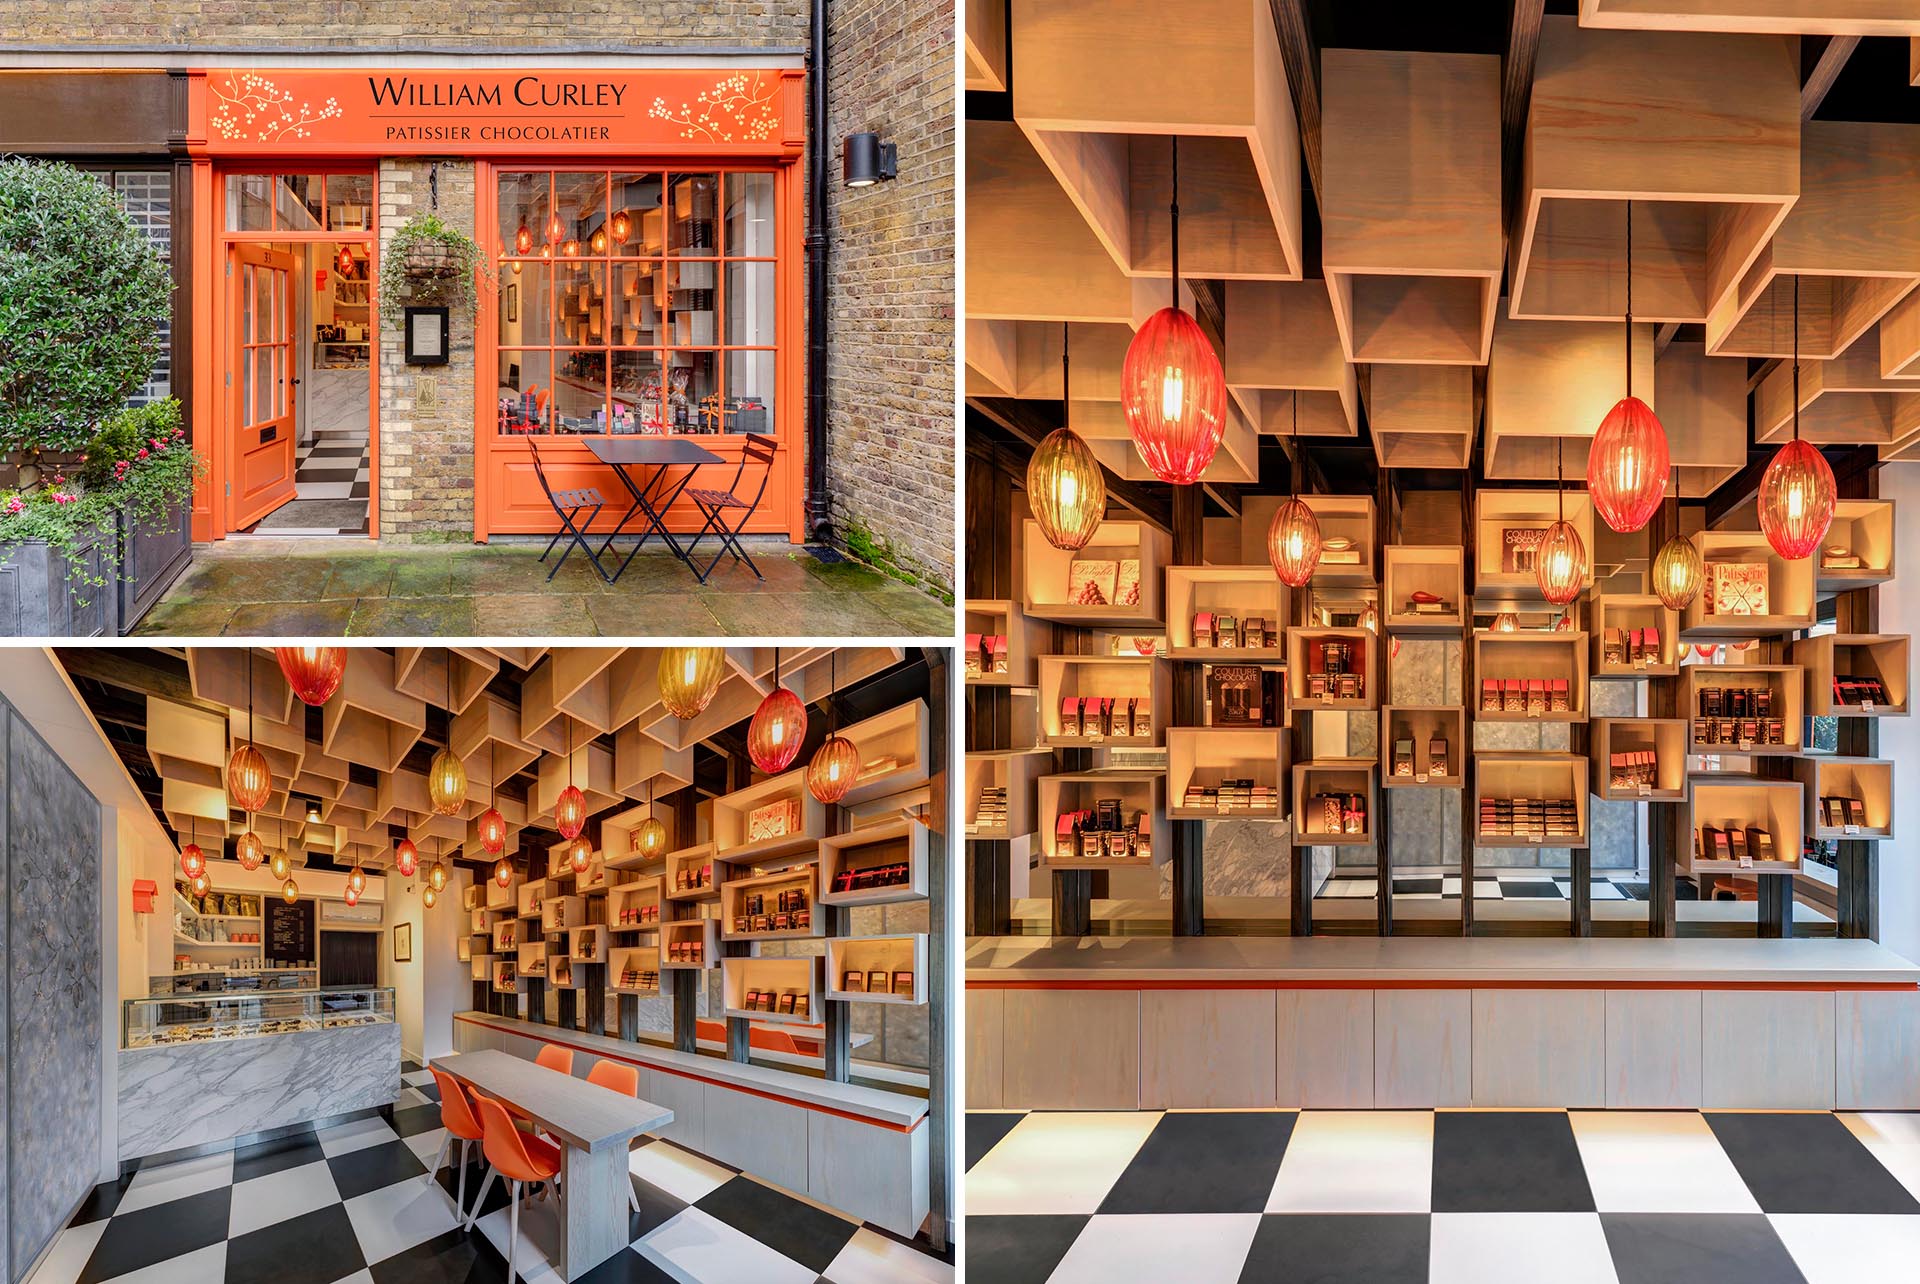 A modern chocolate boutique with a vivid orange facade that draws inspiration from the lid of the boxes the chocolates are packaged in.